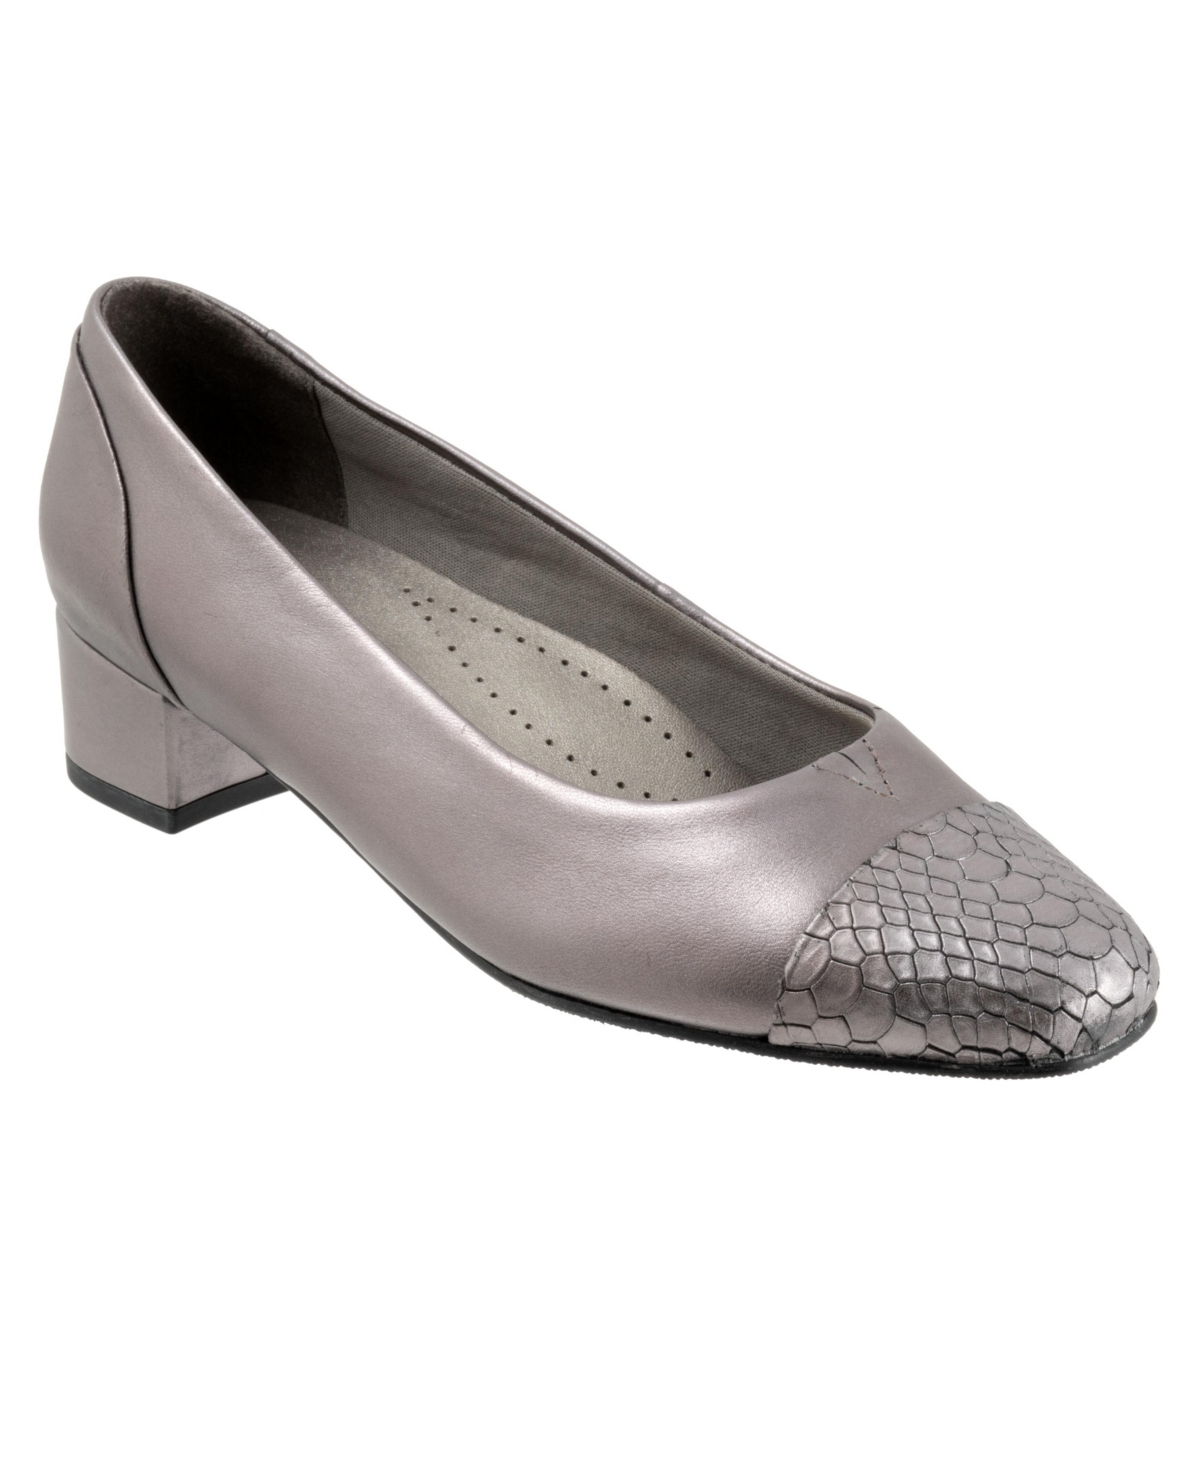 Women's Trotters Daisy Pumps - Pewter snake